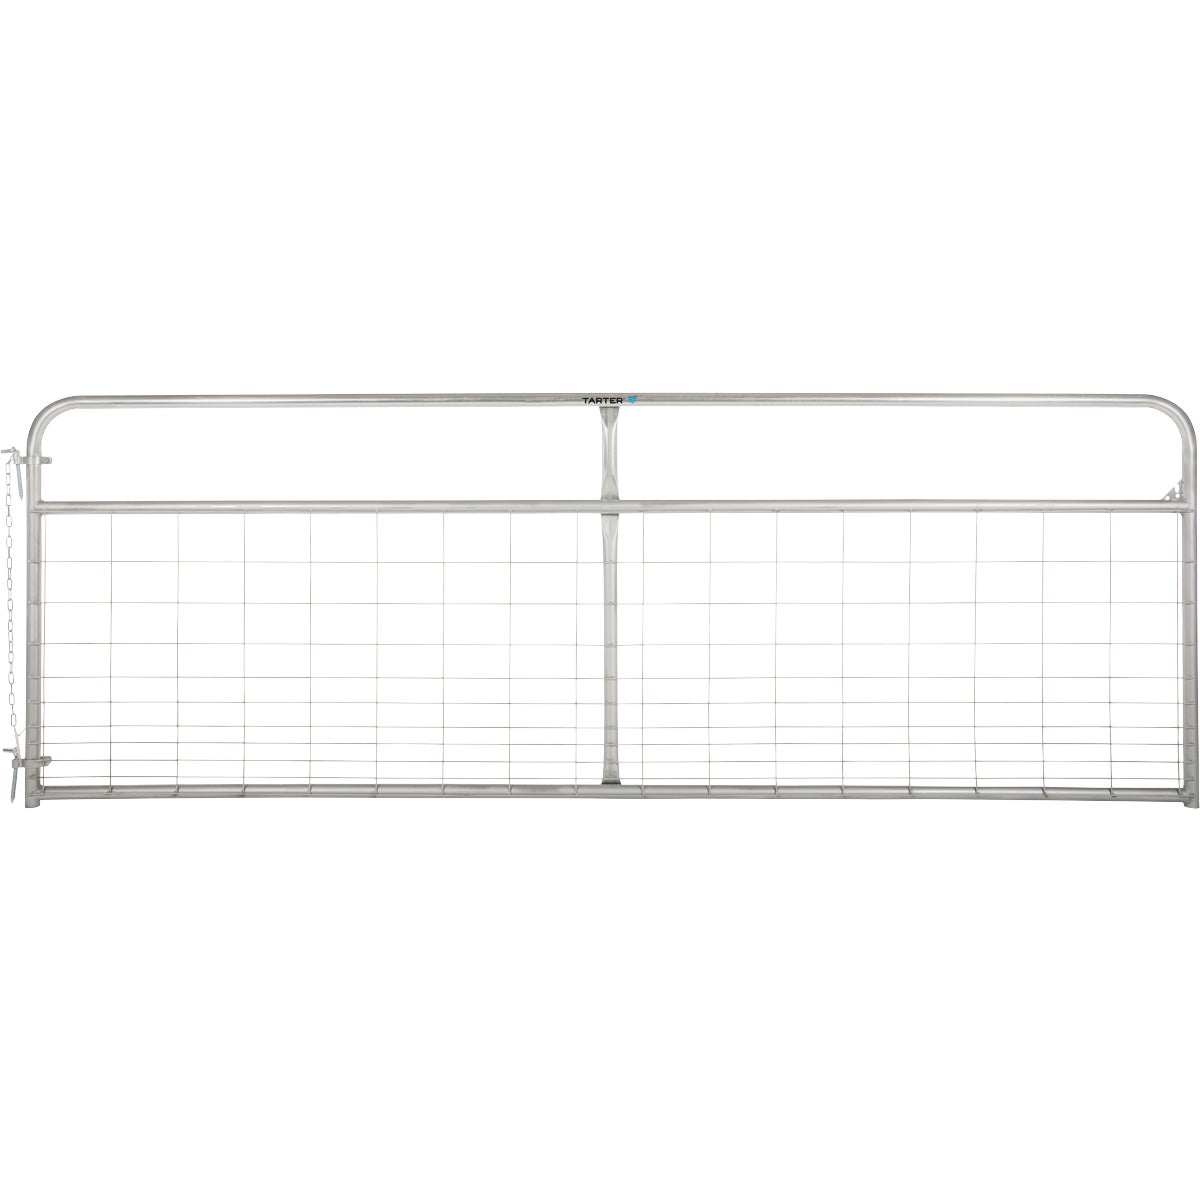 Item 761949, Ideal gate for confinement of hogs, sheep, or any small animal.